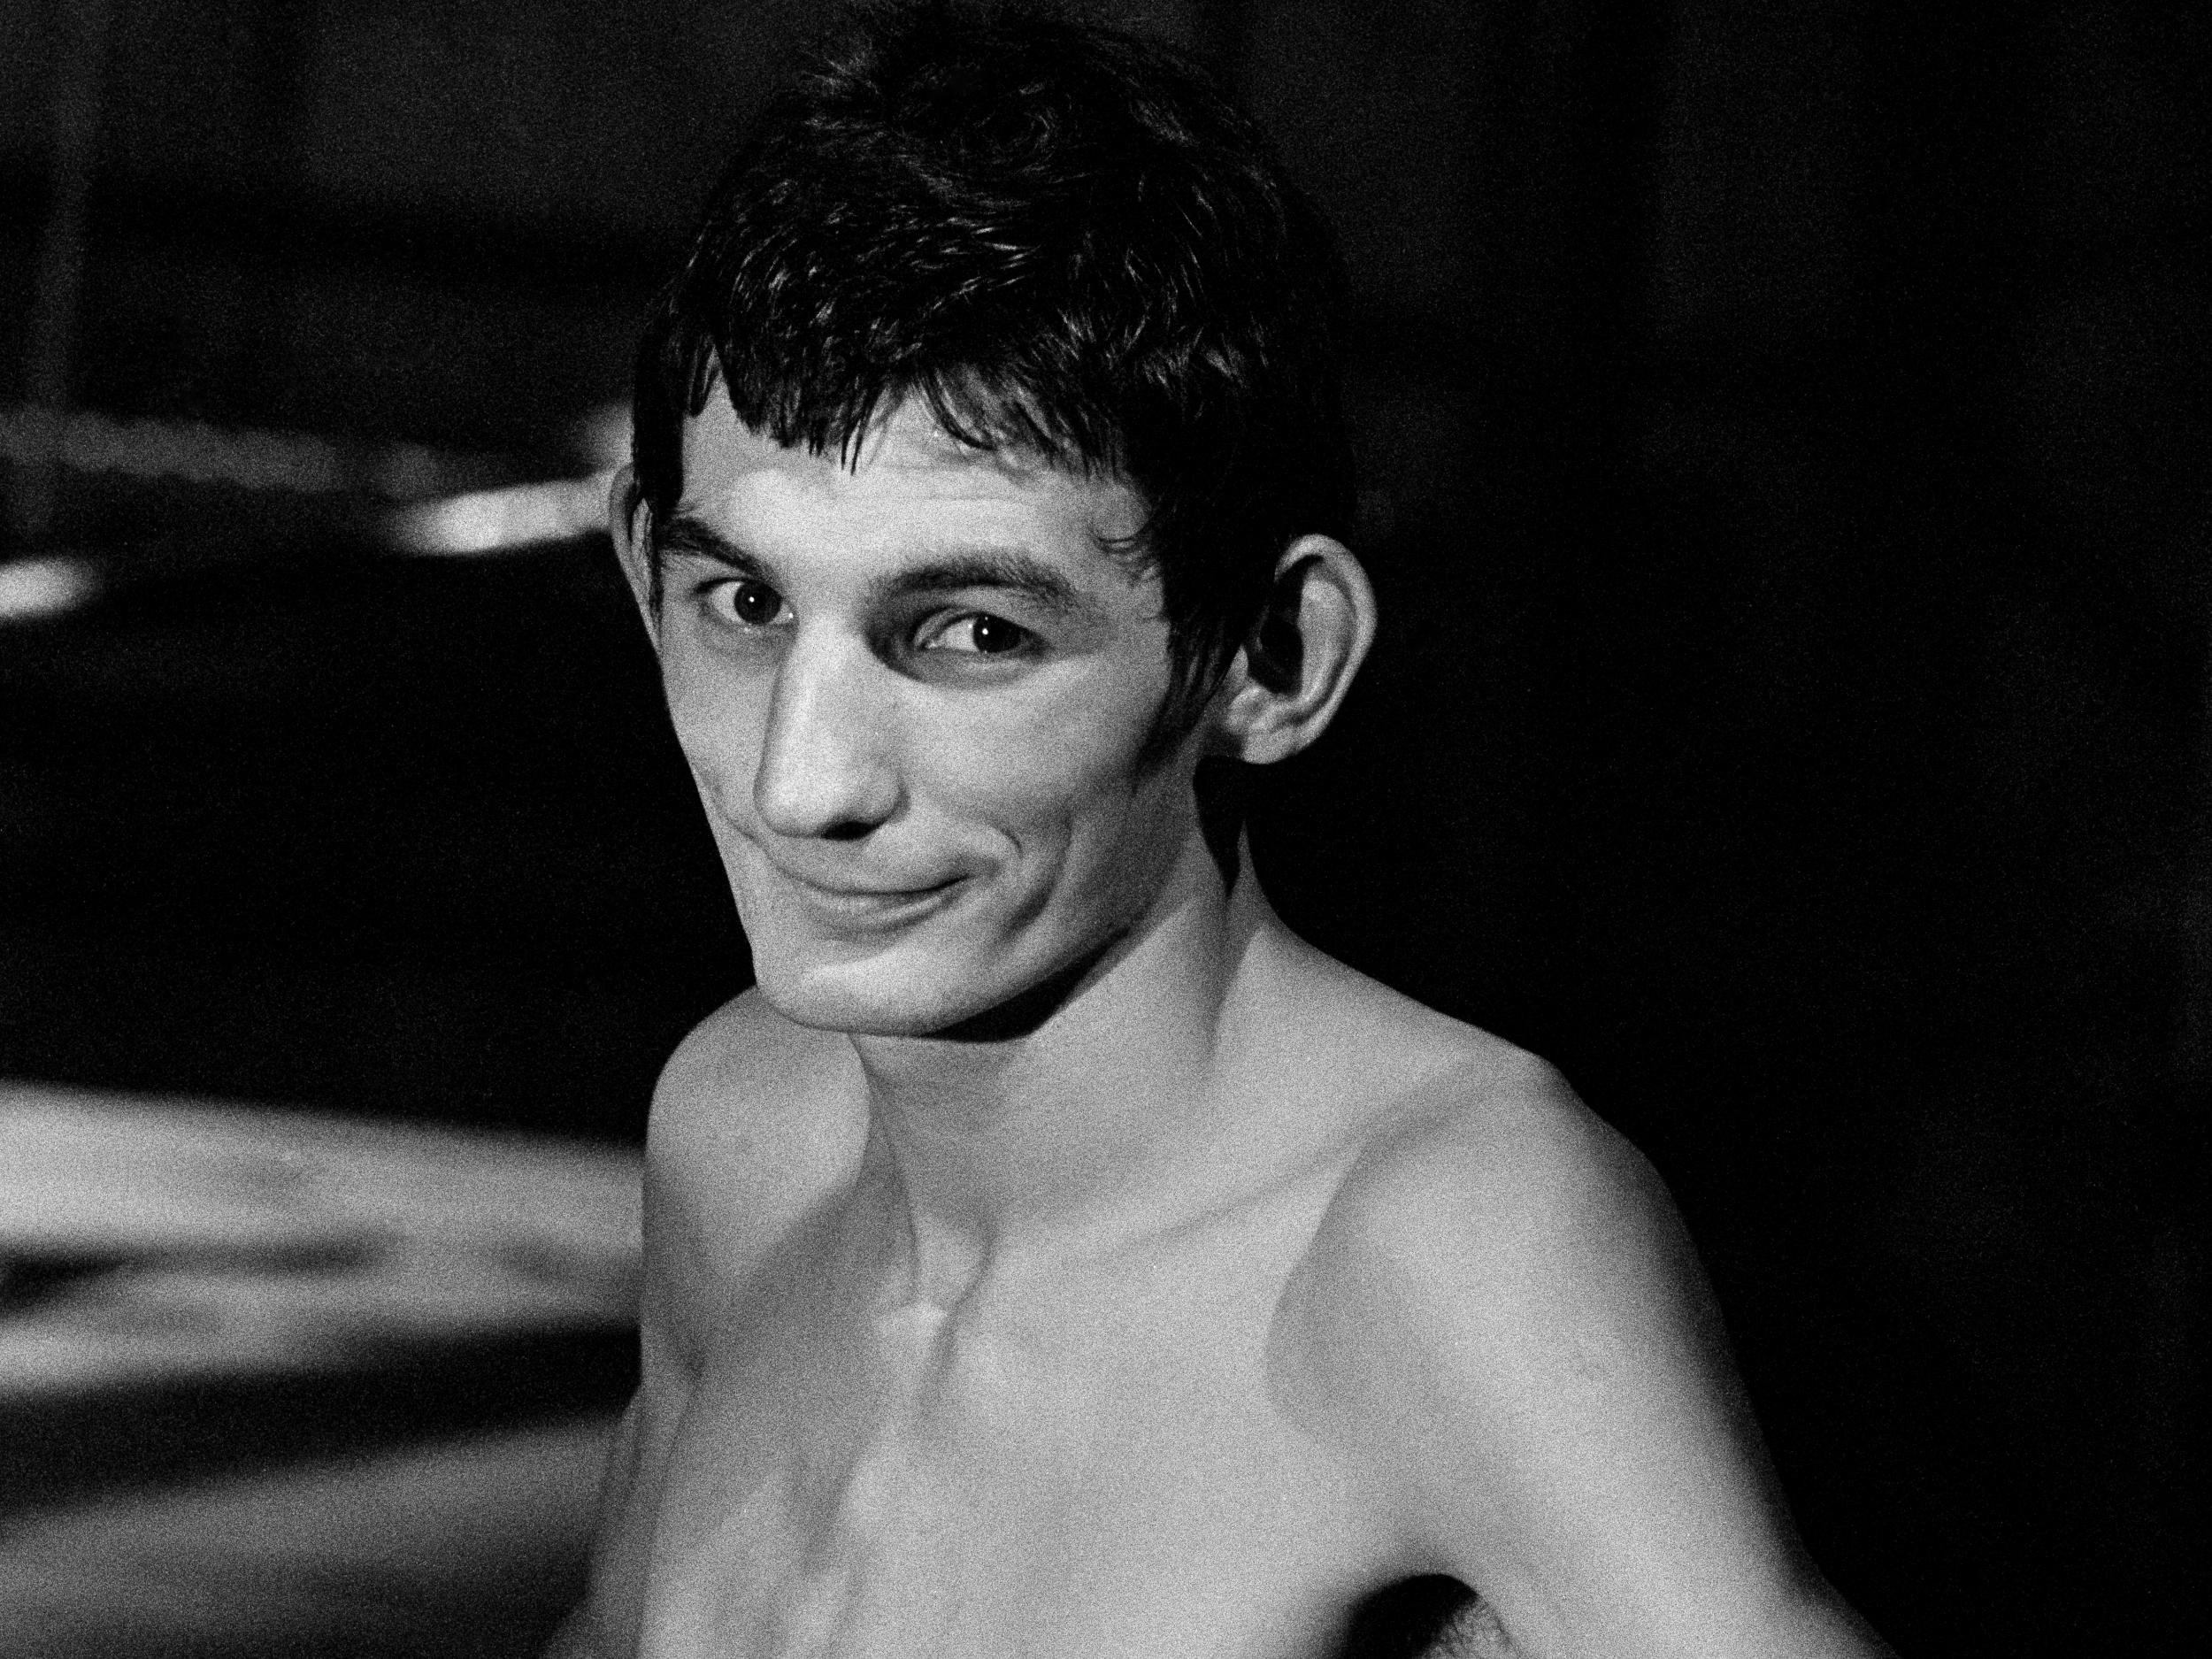 Johnny Owen's final fight was 37 years ago this week